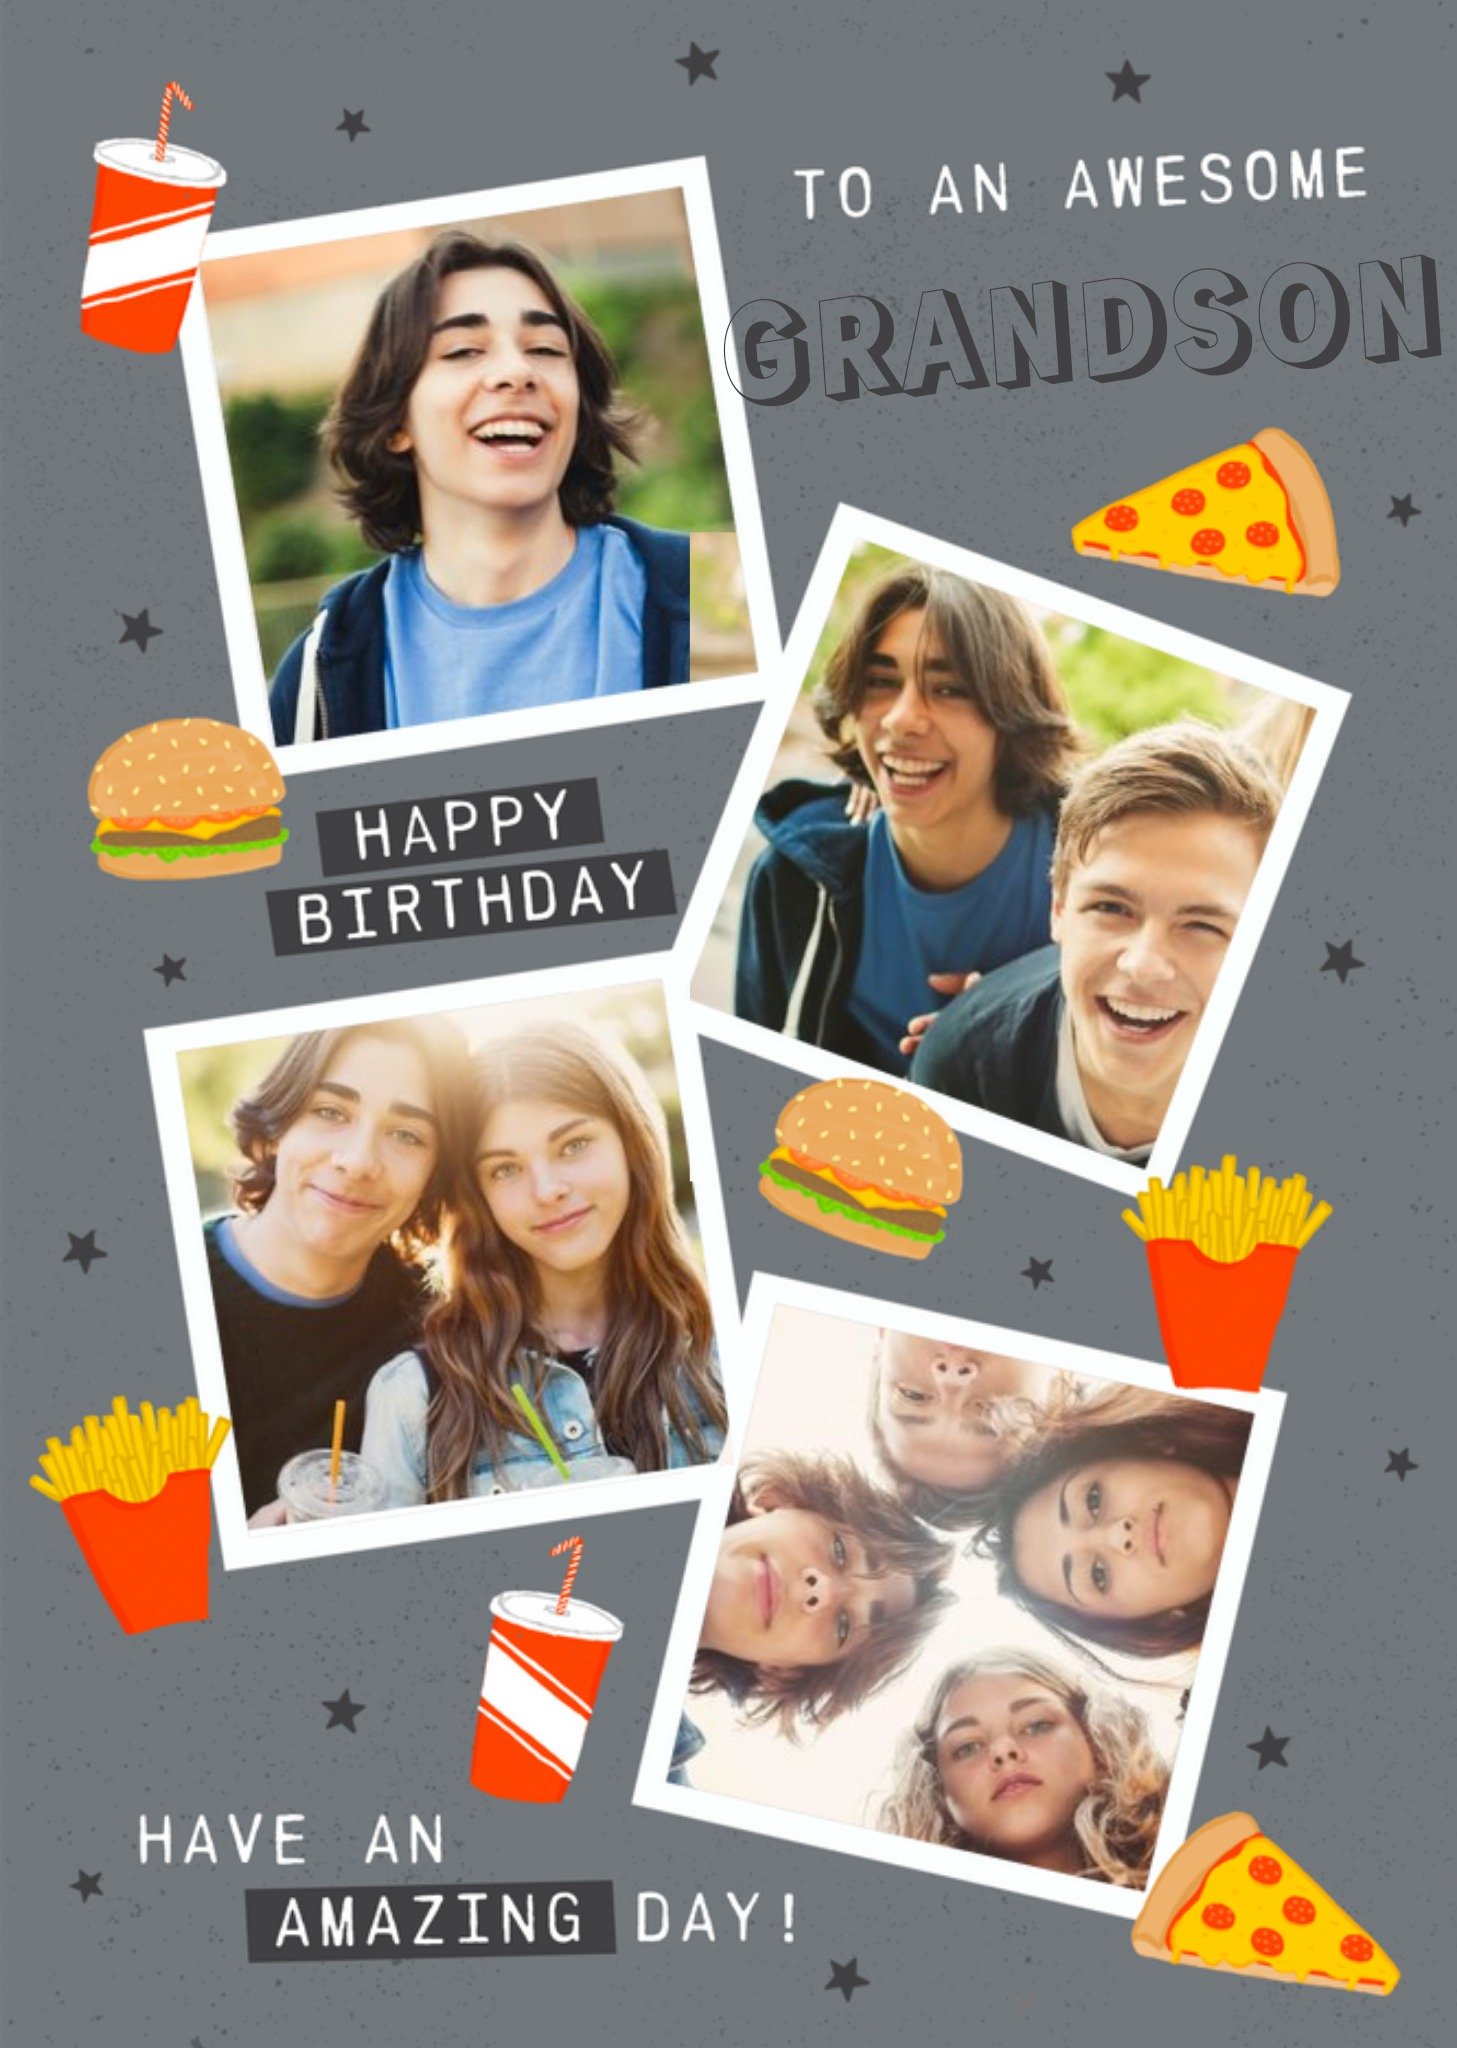 Moonpig To An Awesome Grandson Ilustrated Pizza Birthday Card, Large